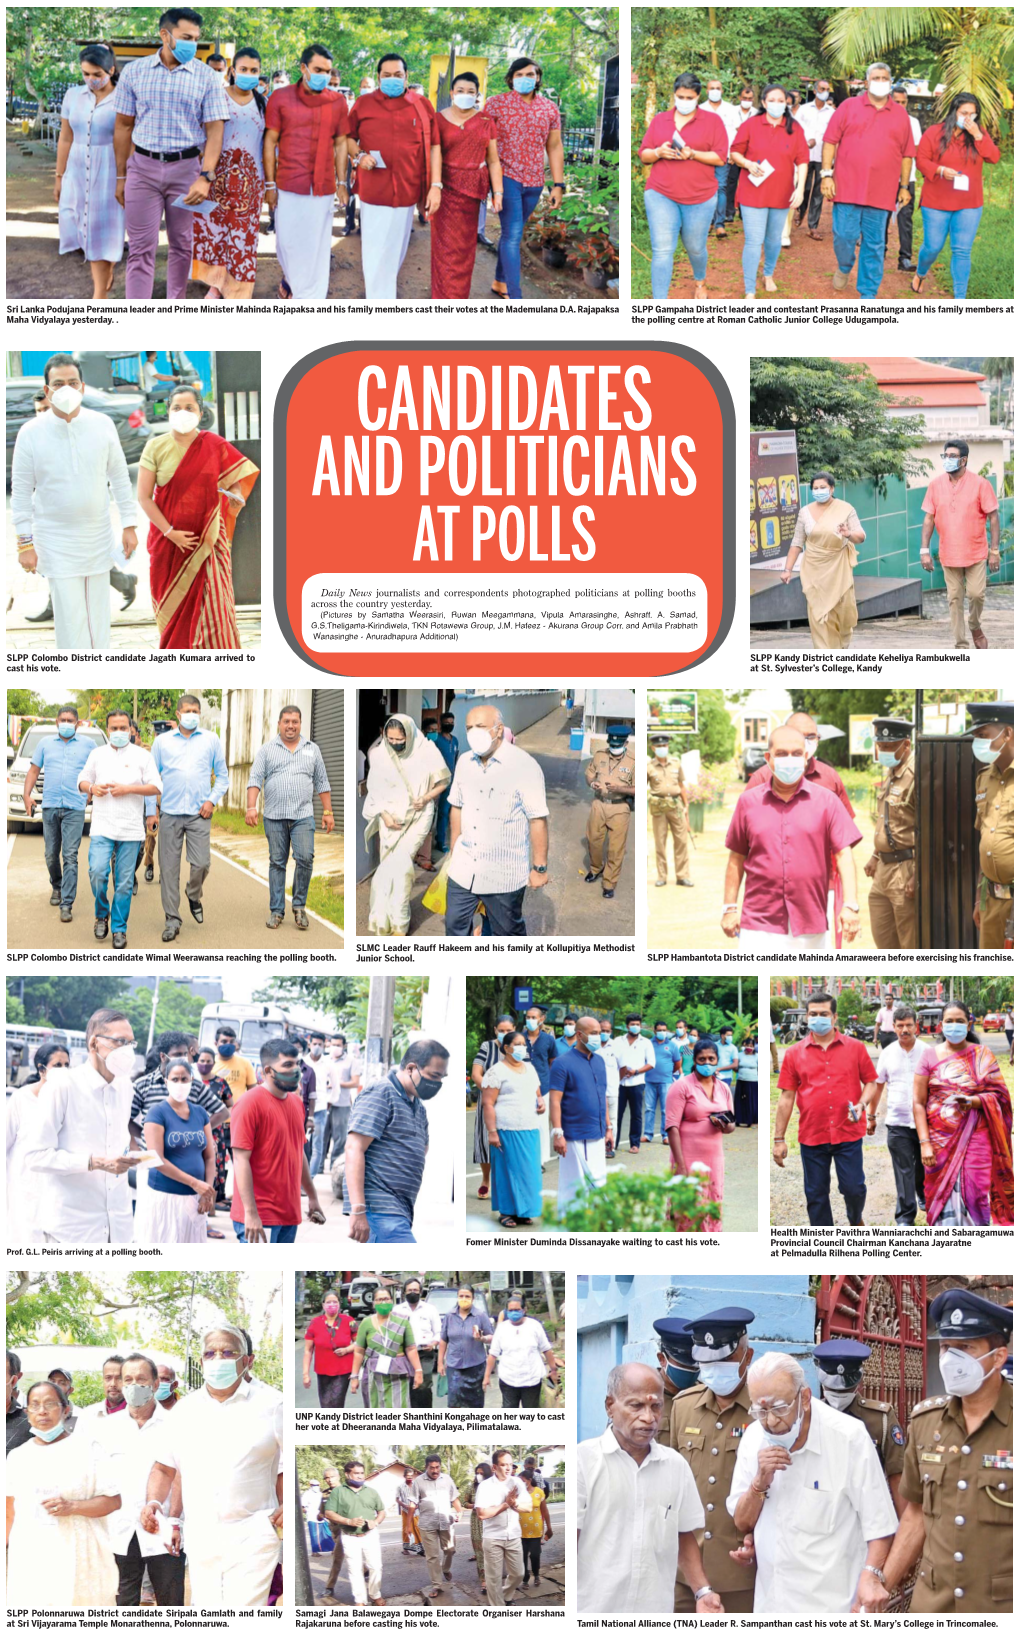 Daily News Journalists and Correspondents Photographed Politicians at Polling Booths Across the Country Yesterday